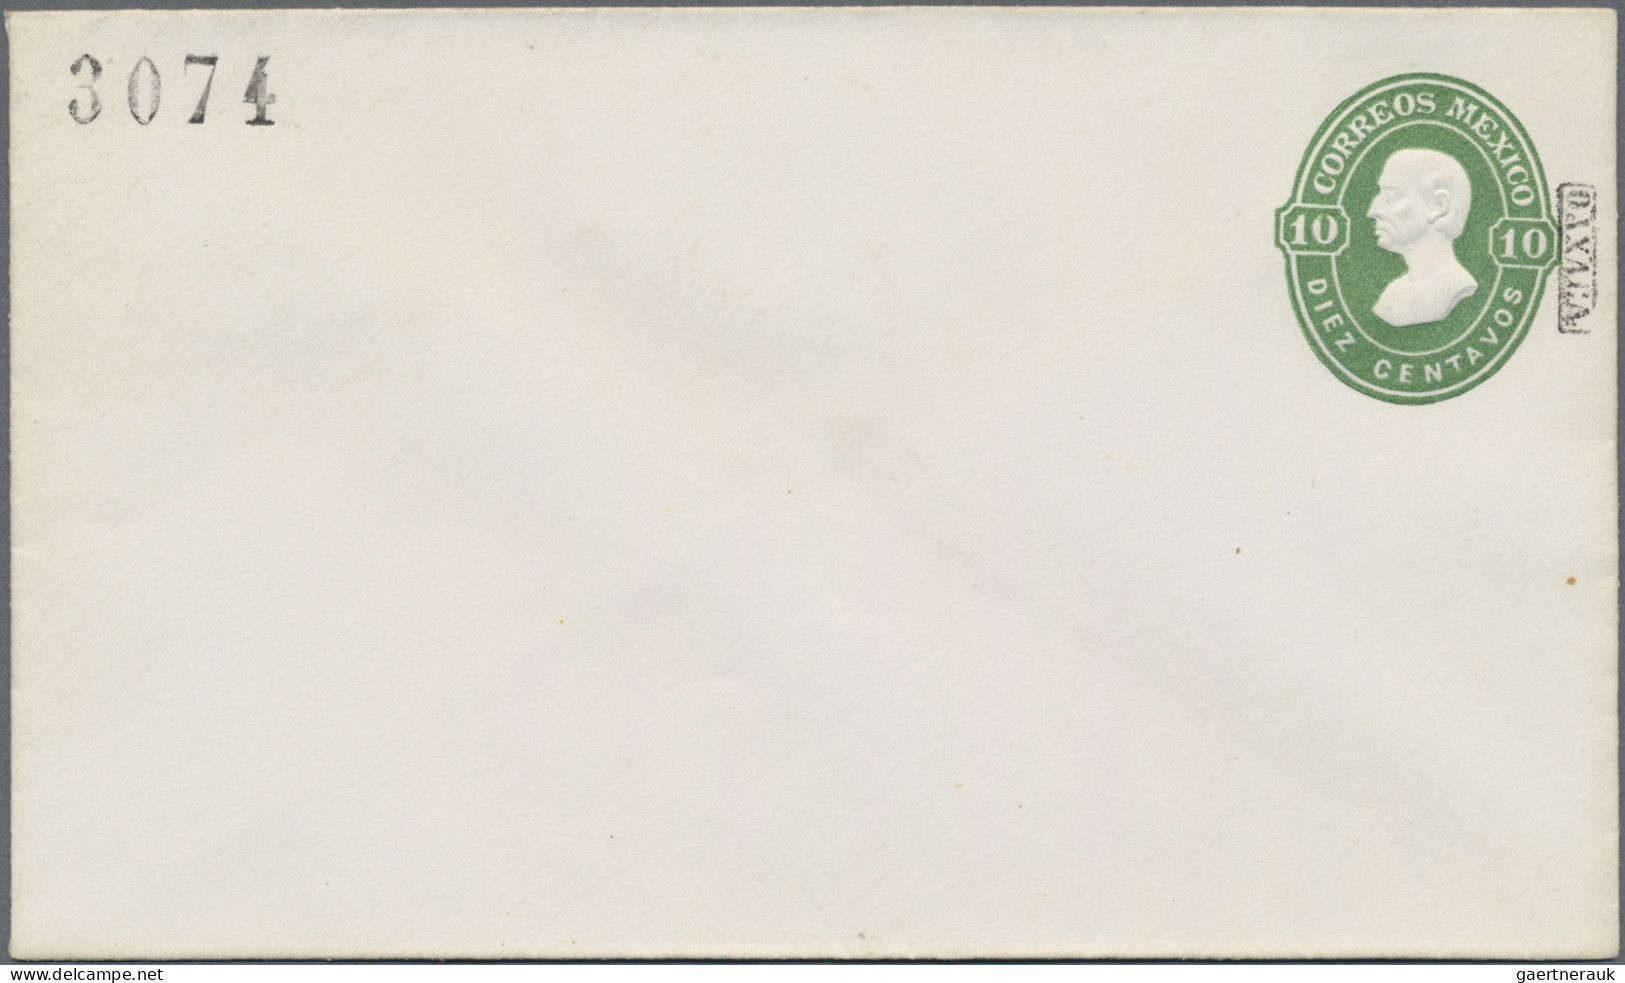 Mexico - Postal stationary: 1874, envelope 10 C. green (5) with district ovpt. 3